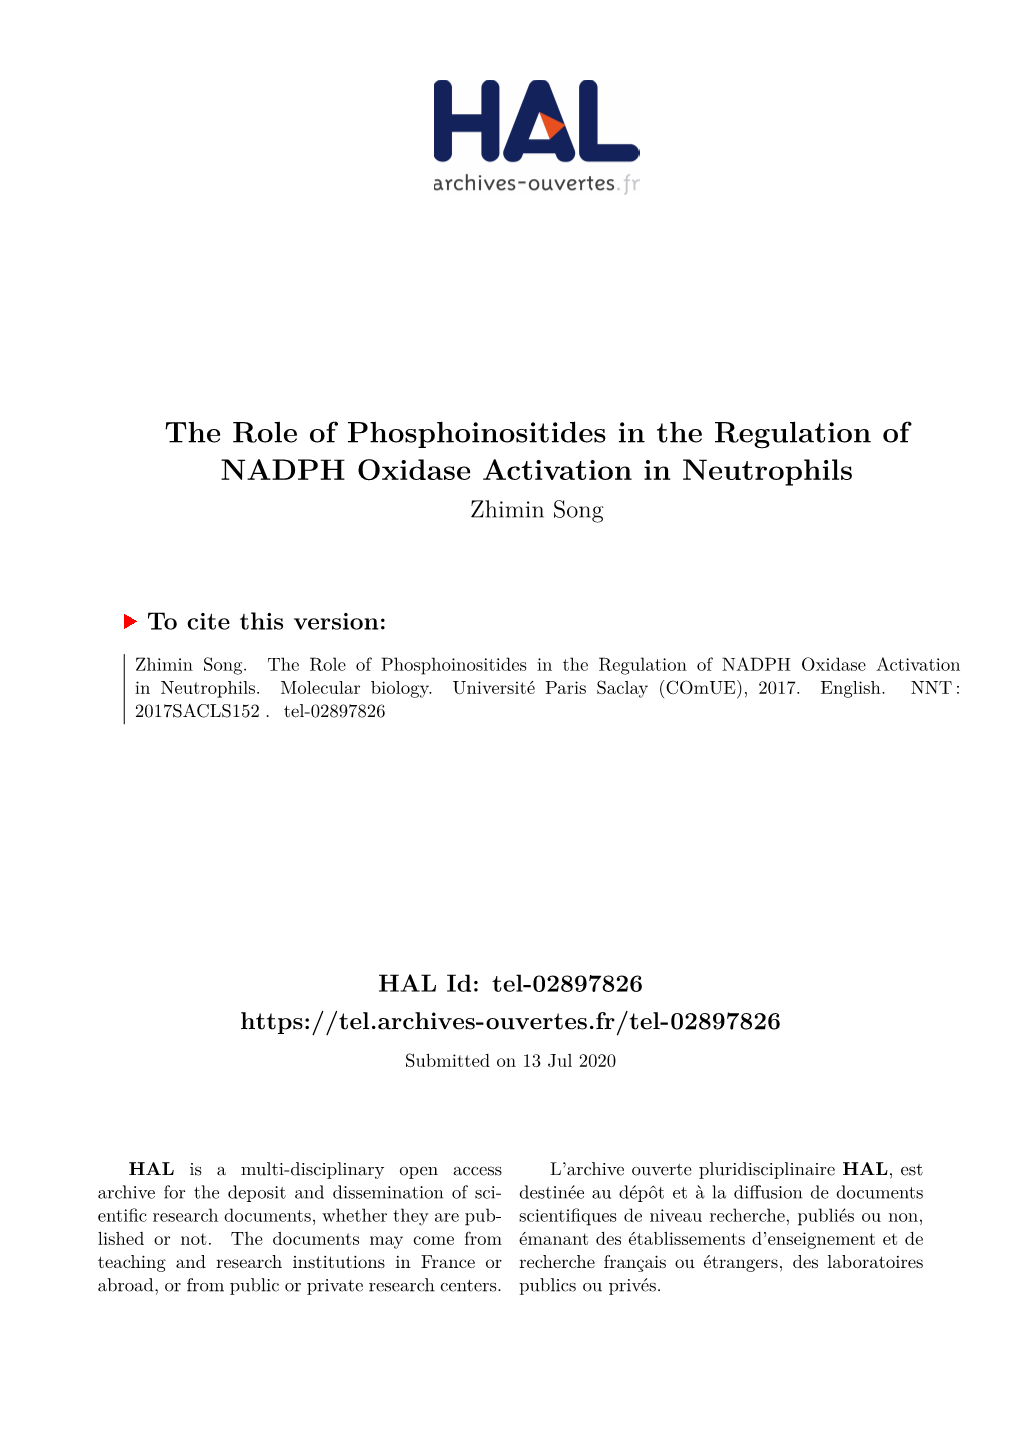 The Role of Phosphoinositides in the Regulation of NADPH Oxidase Activation in Neutrophils Zhimin Song